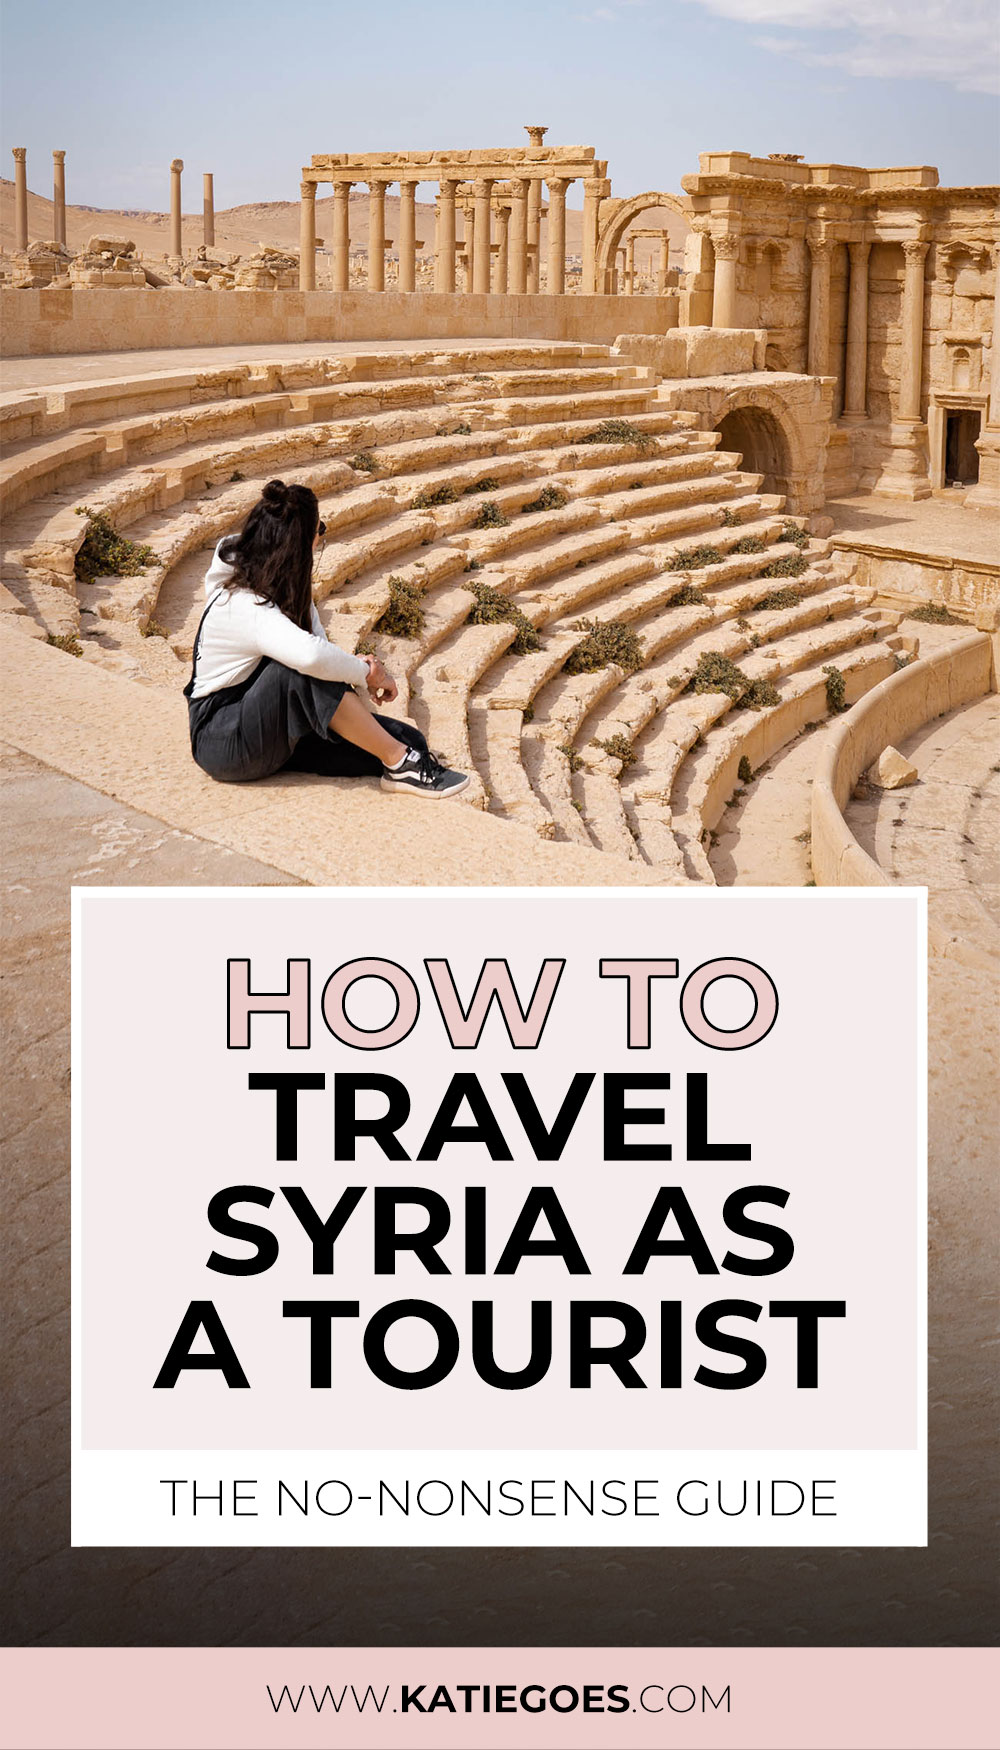 How to Travel to Syria as a Tourist